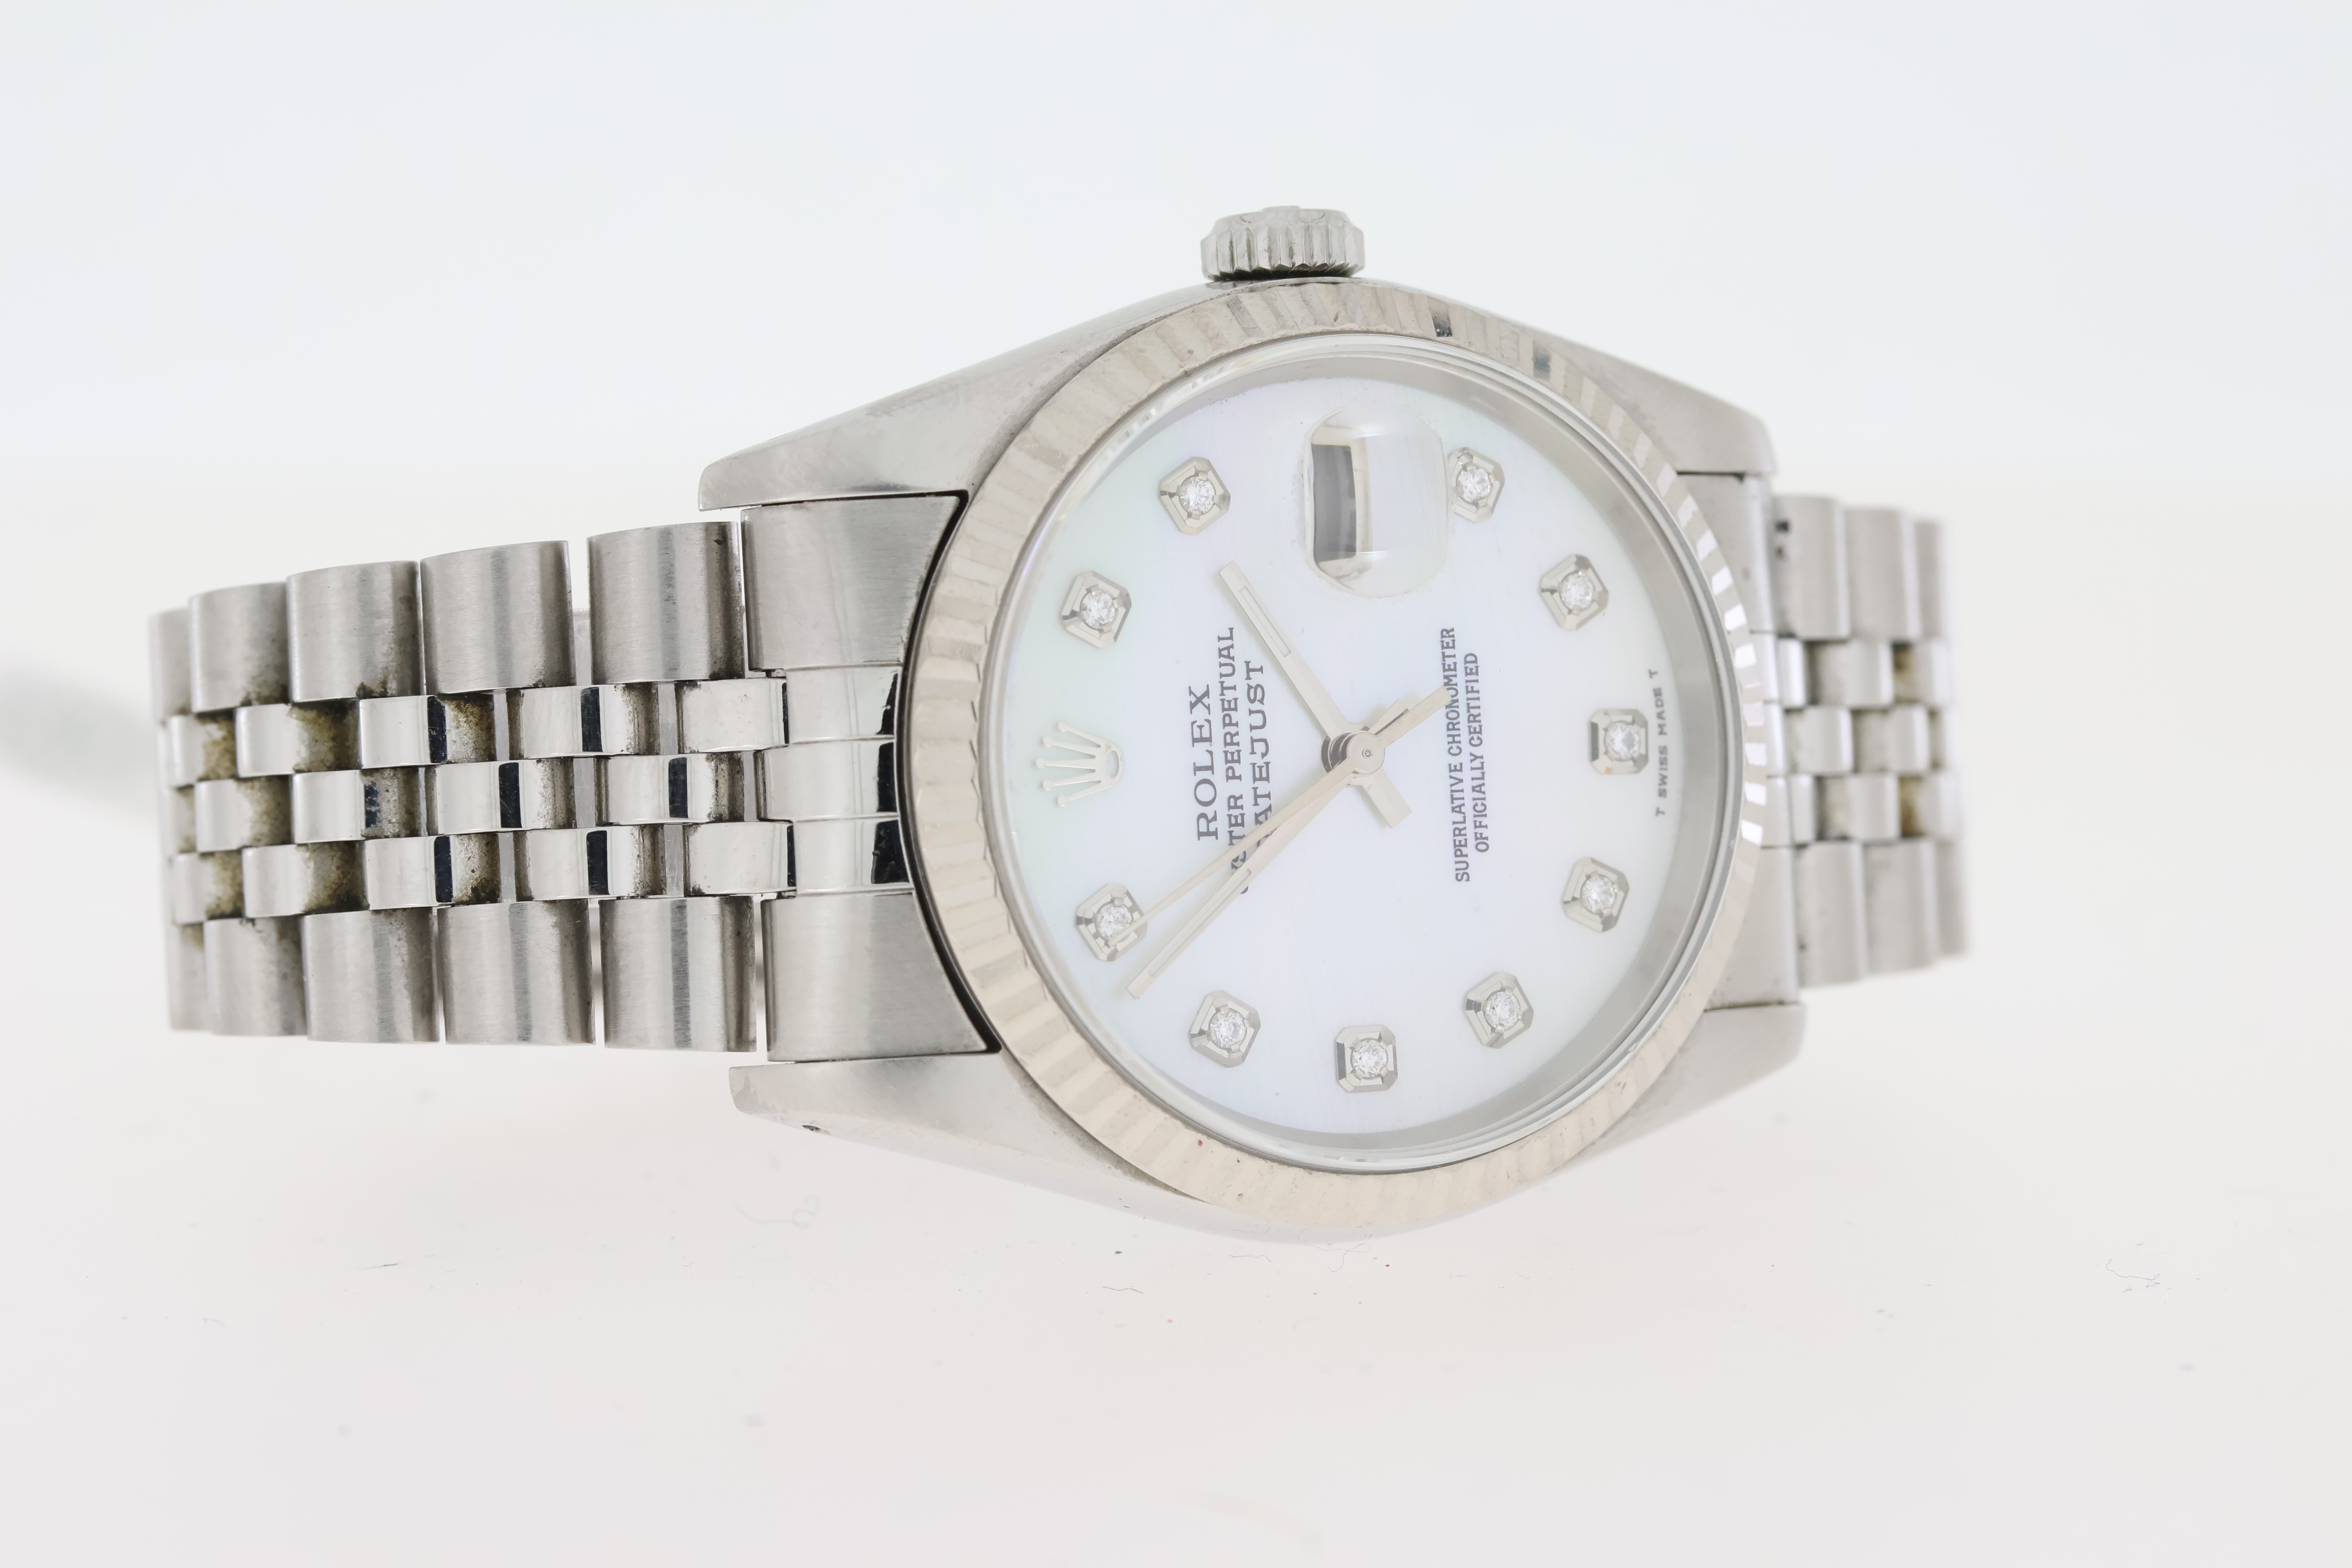 Rolex Oyster Perpetual DateJust 16234 Automatic - Image 3 of 7